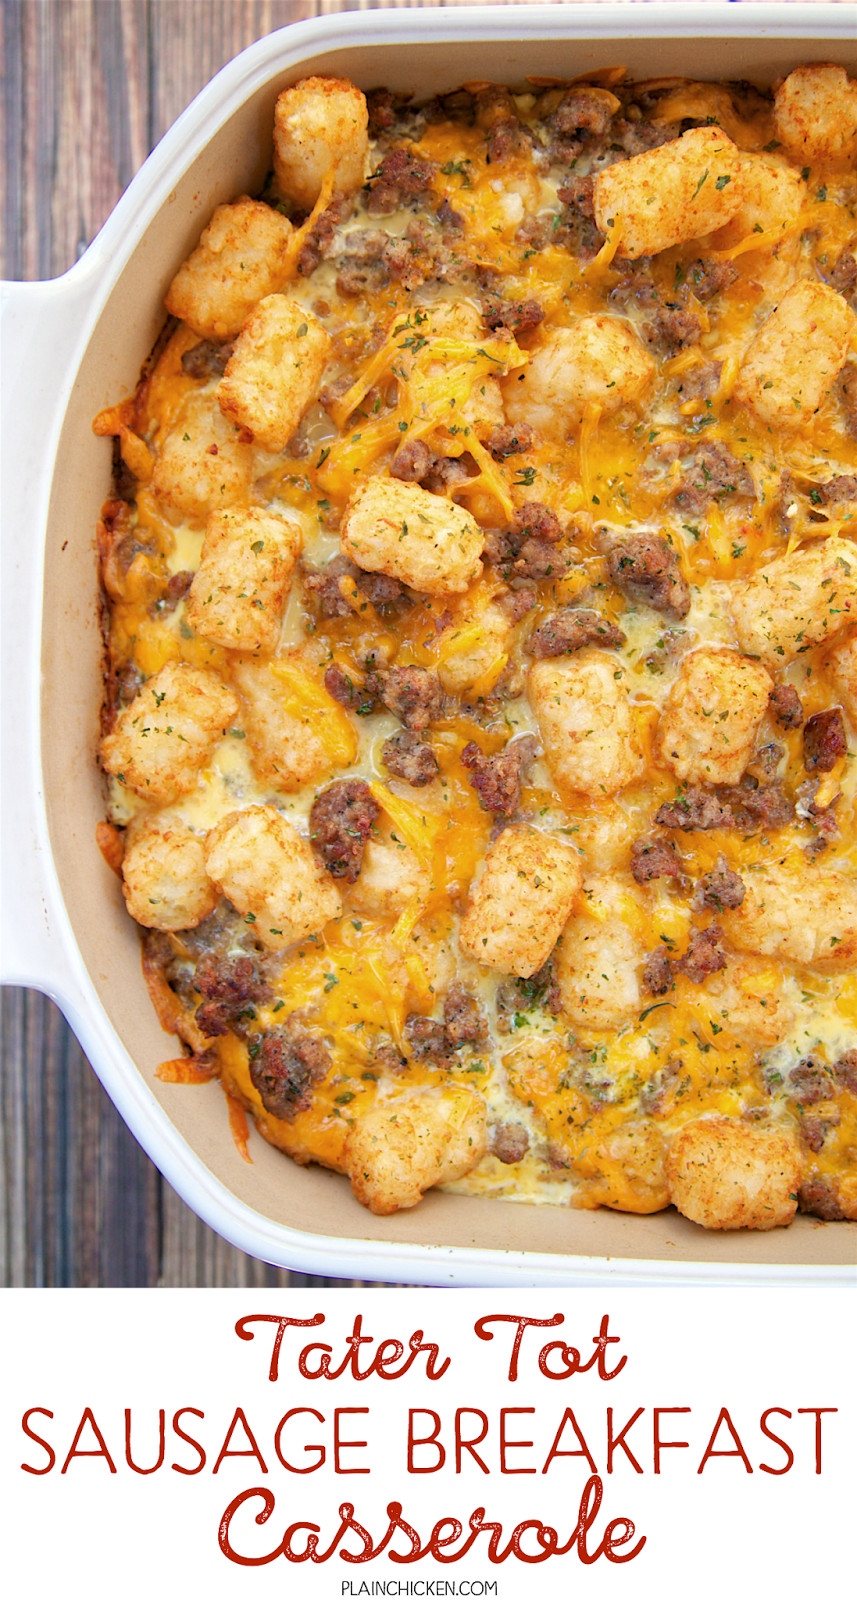 Breakfast Casserole With Tater Tots And Sausage
 Tater Tot Sausage Breakfast Casserole